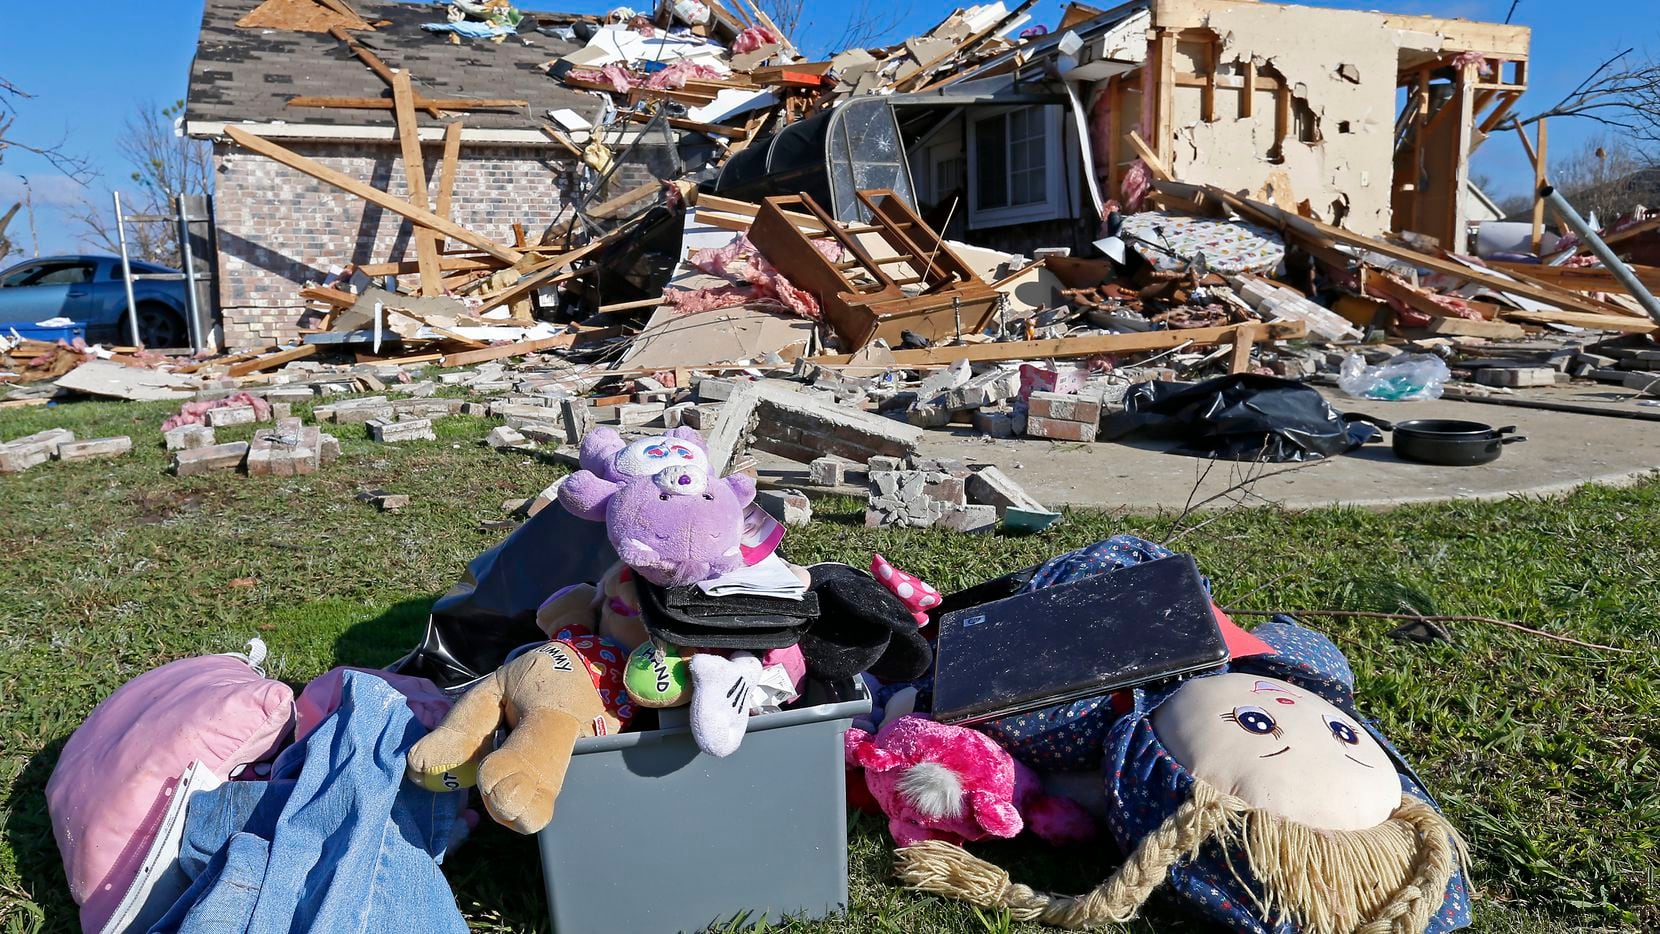 Damage of a house is seen in the aftermath of a Dec. 26, 2015 tornado in Rowlett.